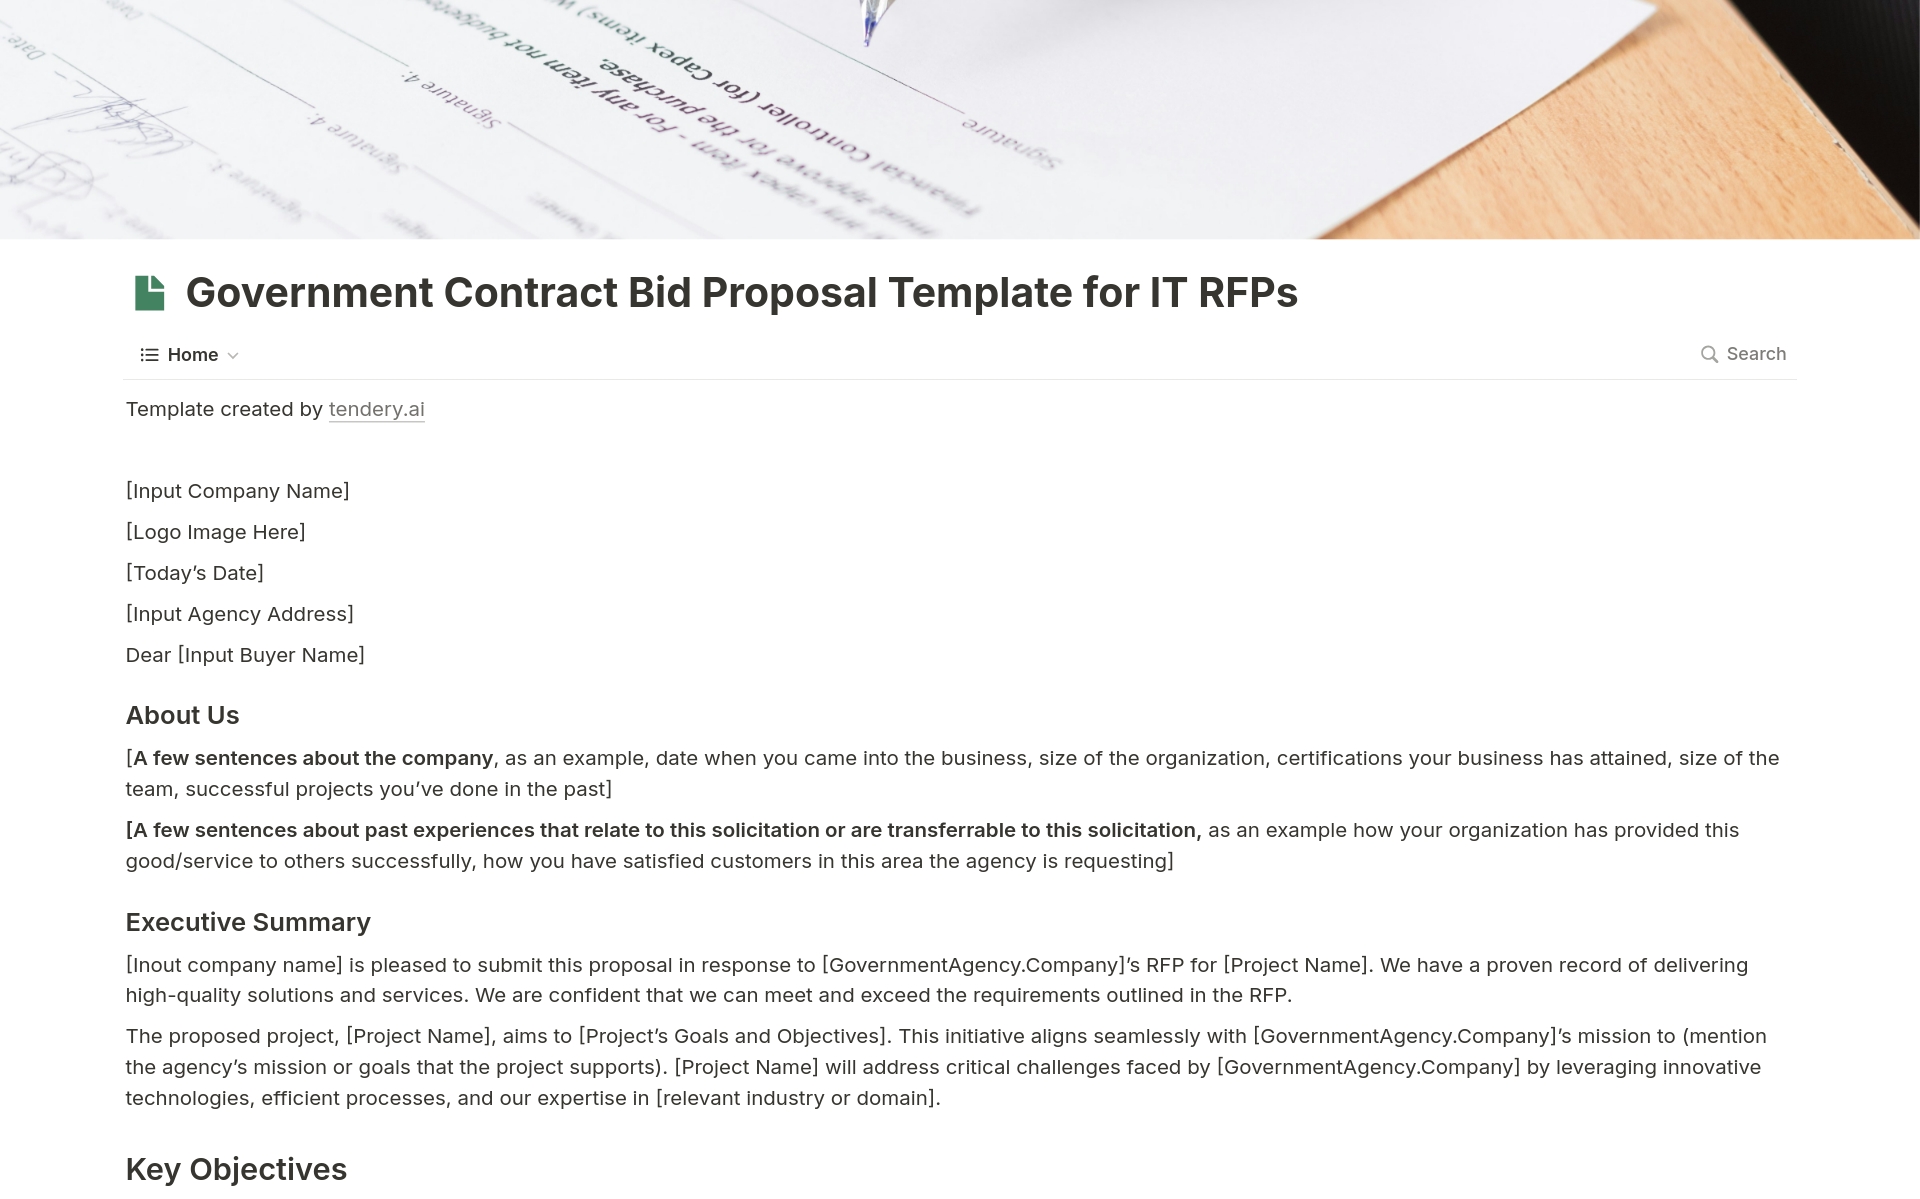 A template preview for Bid proposal for IT RFPs